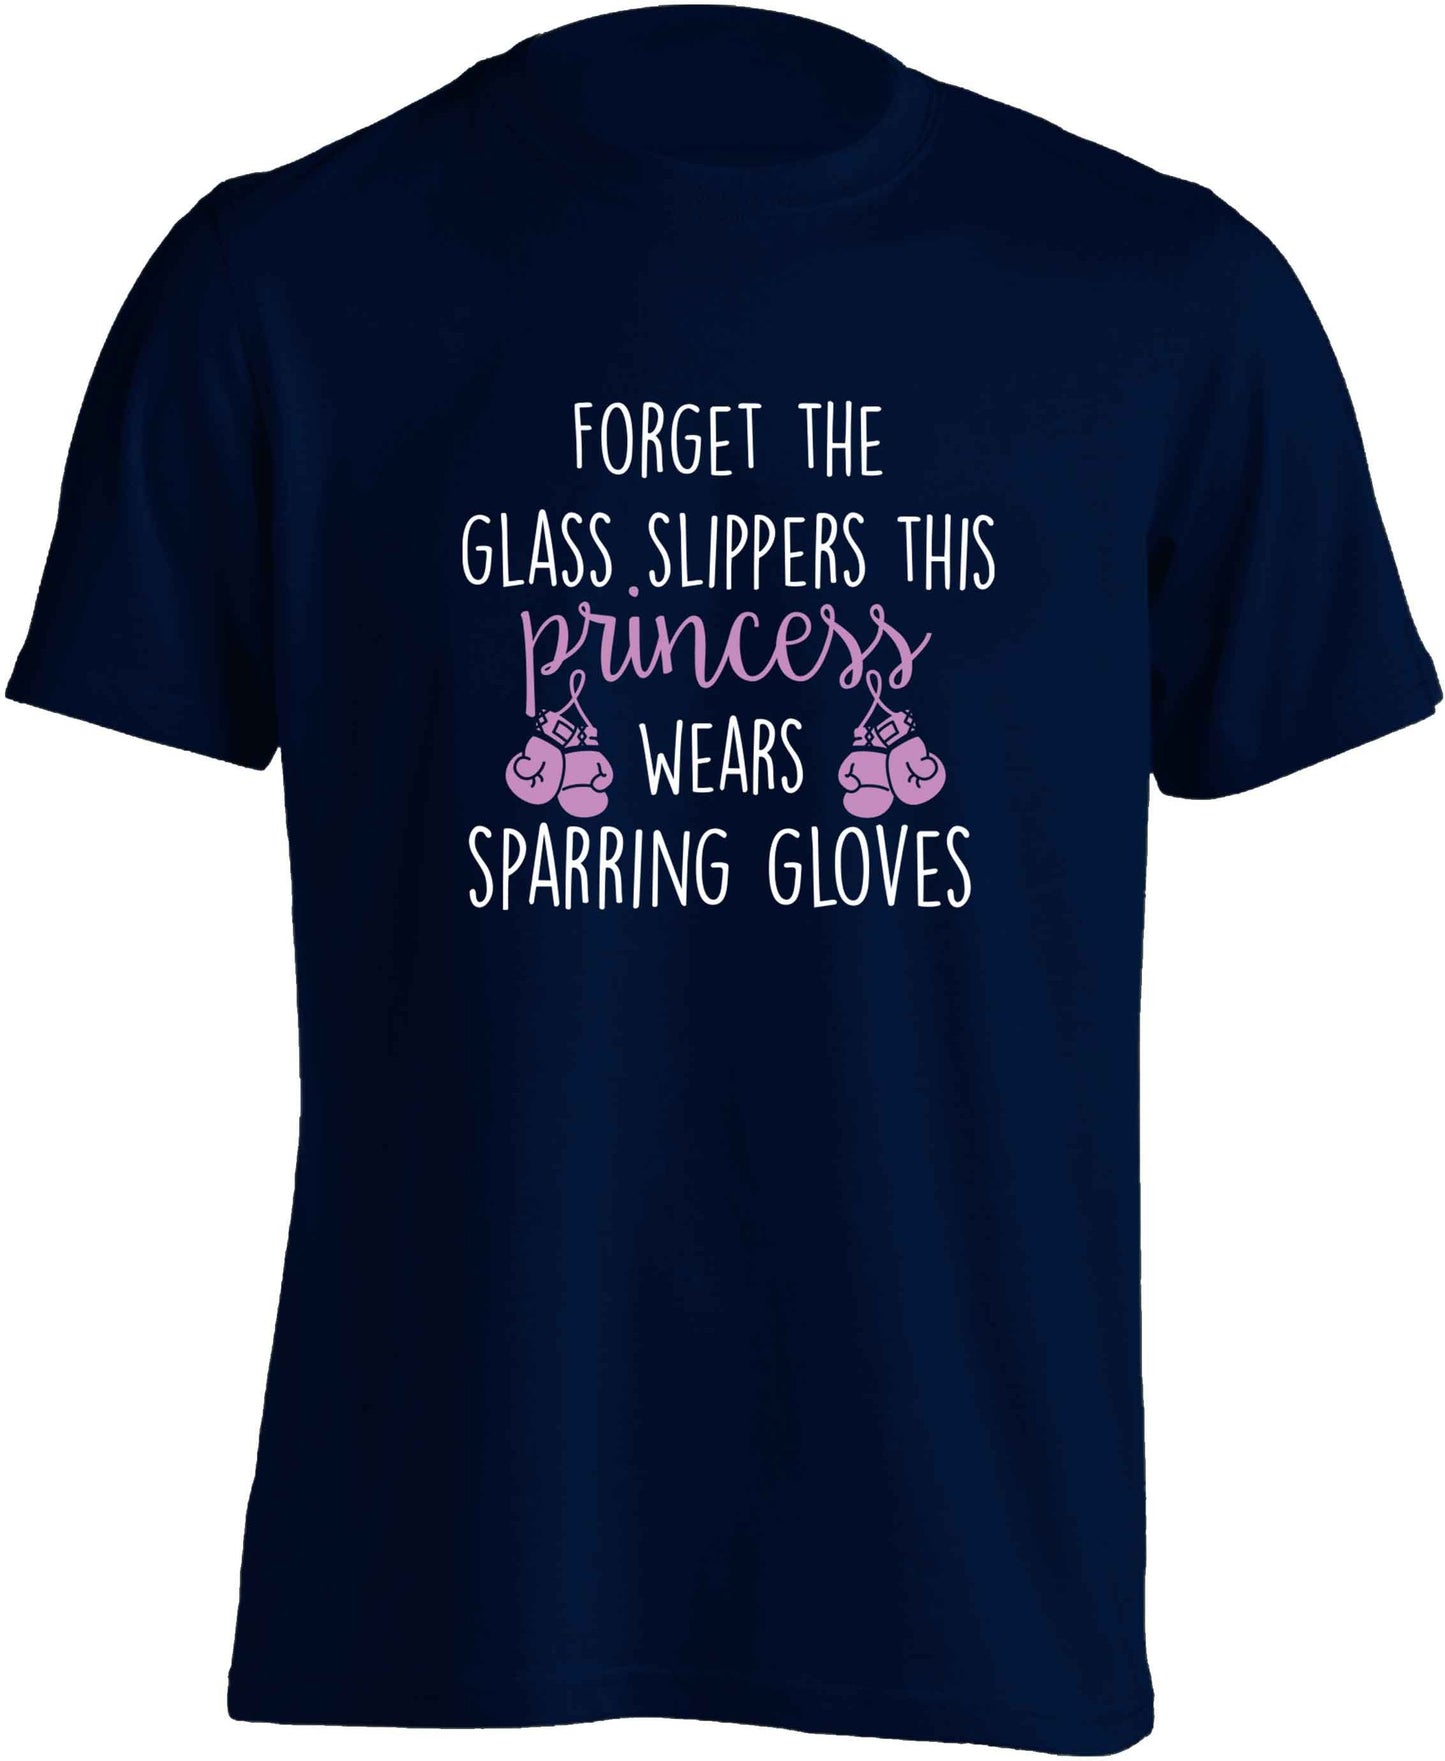 Forget the glass slippers this princess wears sparring gloves adults unisex navy Tshirt 2XL